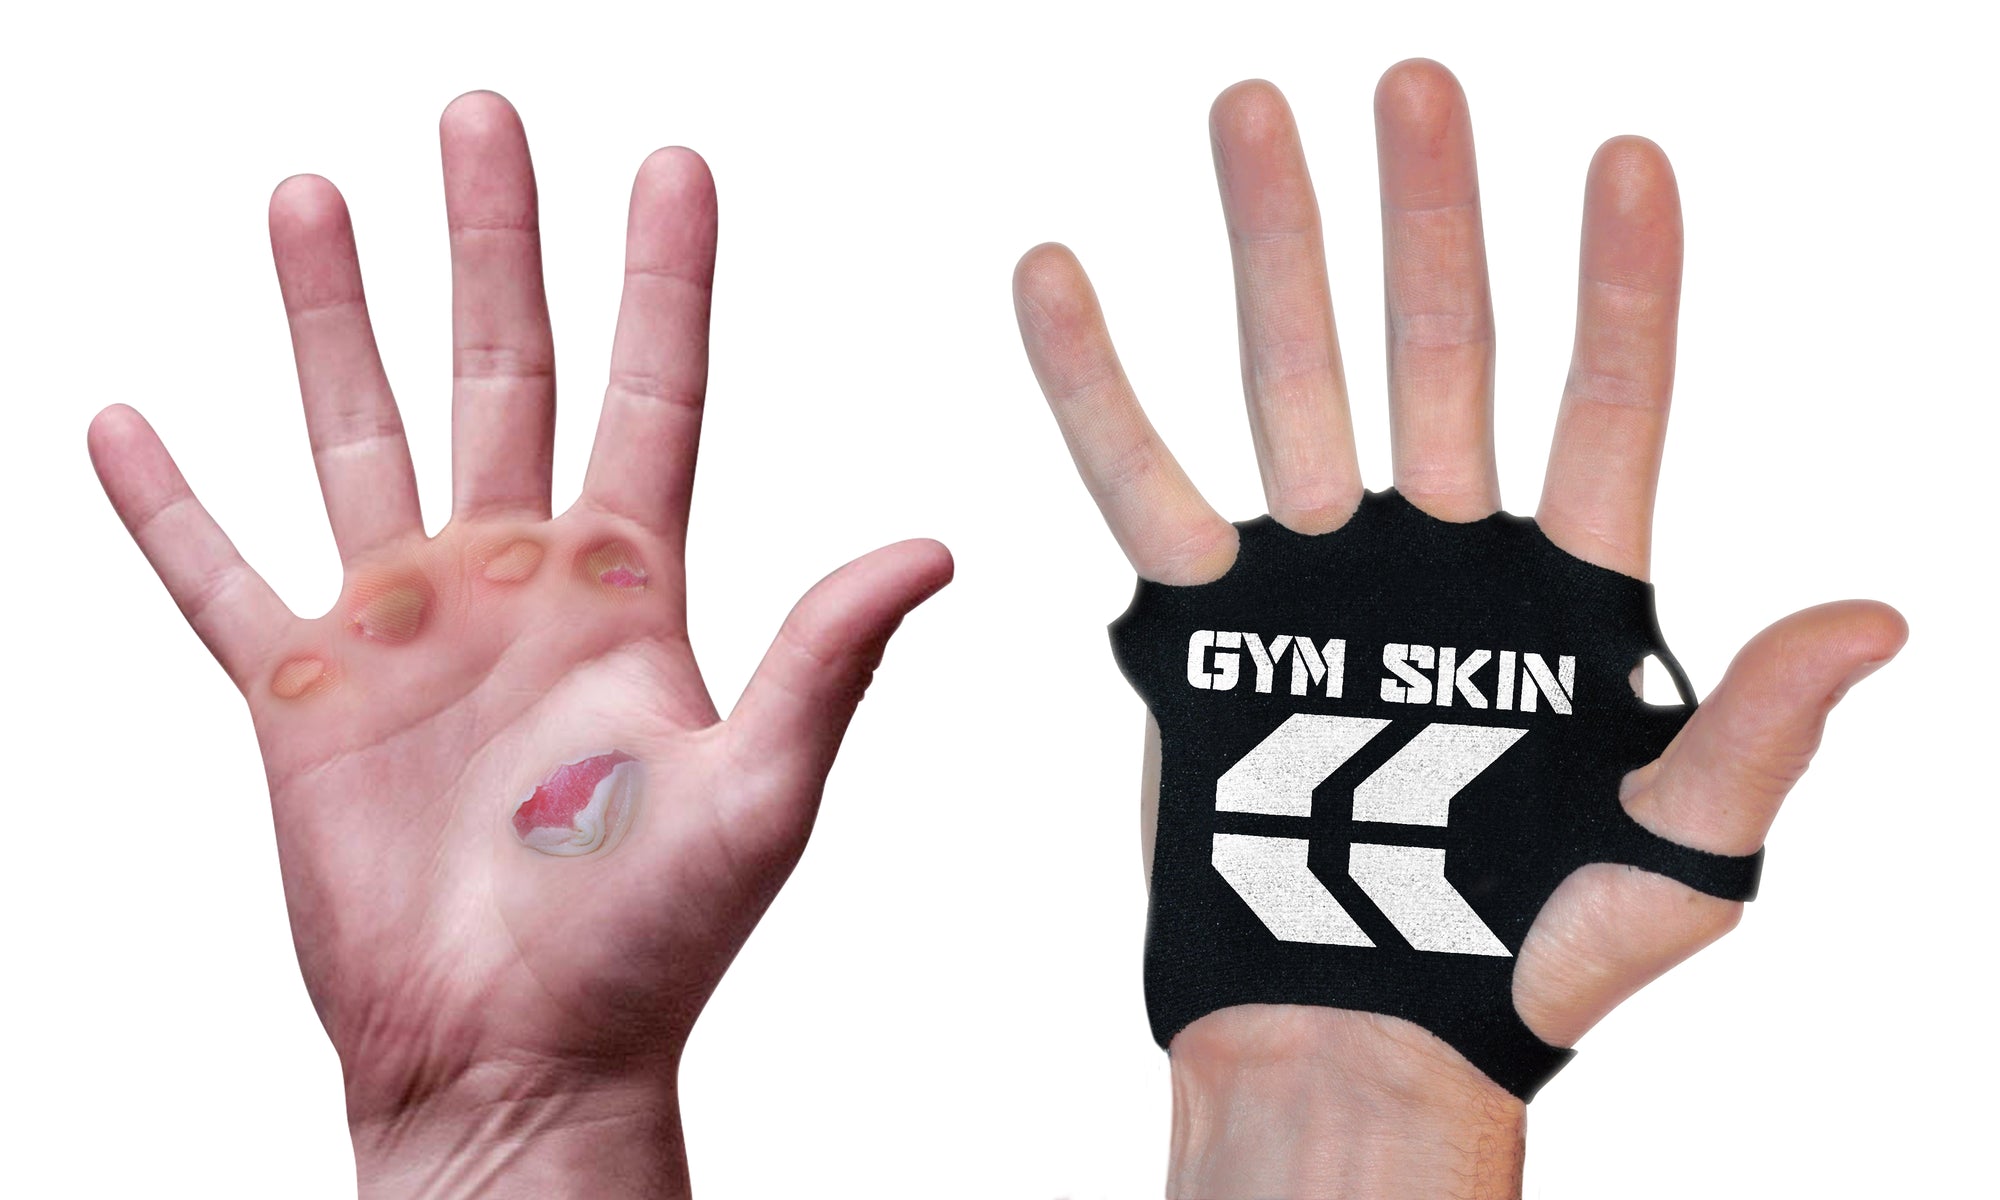 two hands side by side. one is damaged and full of blisters and tears. the other is wearing a black gym skin palm protector from STKR Concepts